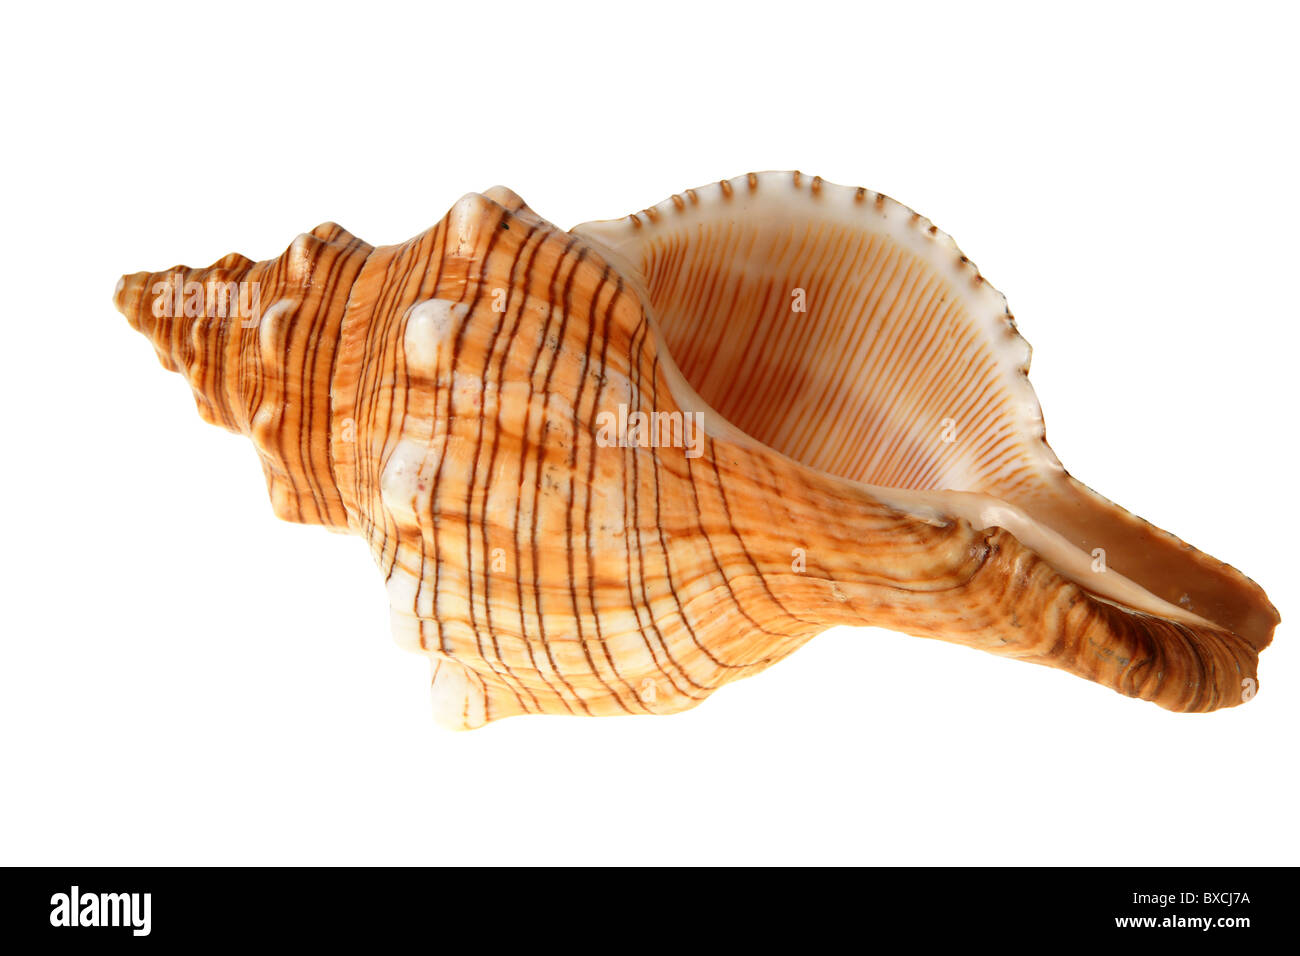 Grand coquillage de limace isolé sur blanc (with clipping path) Banque D'Images